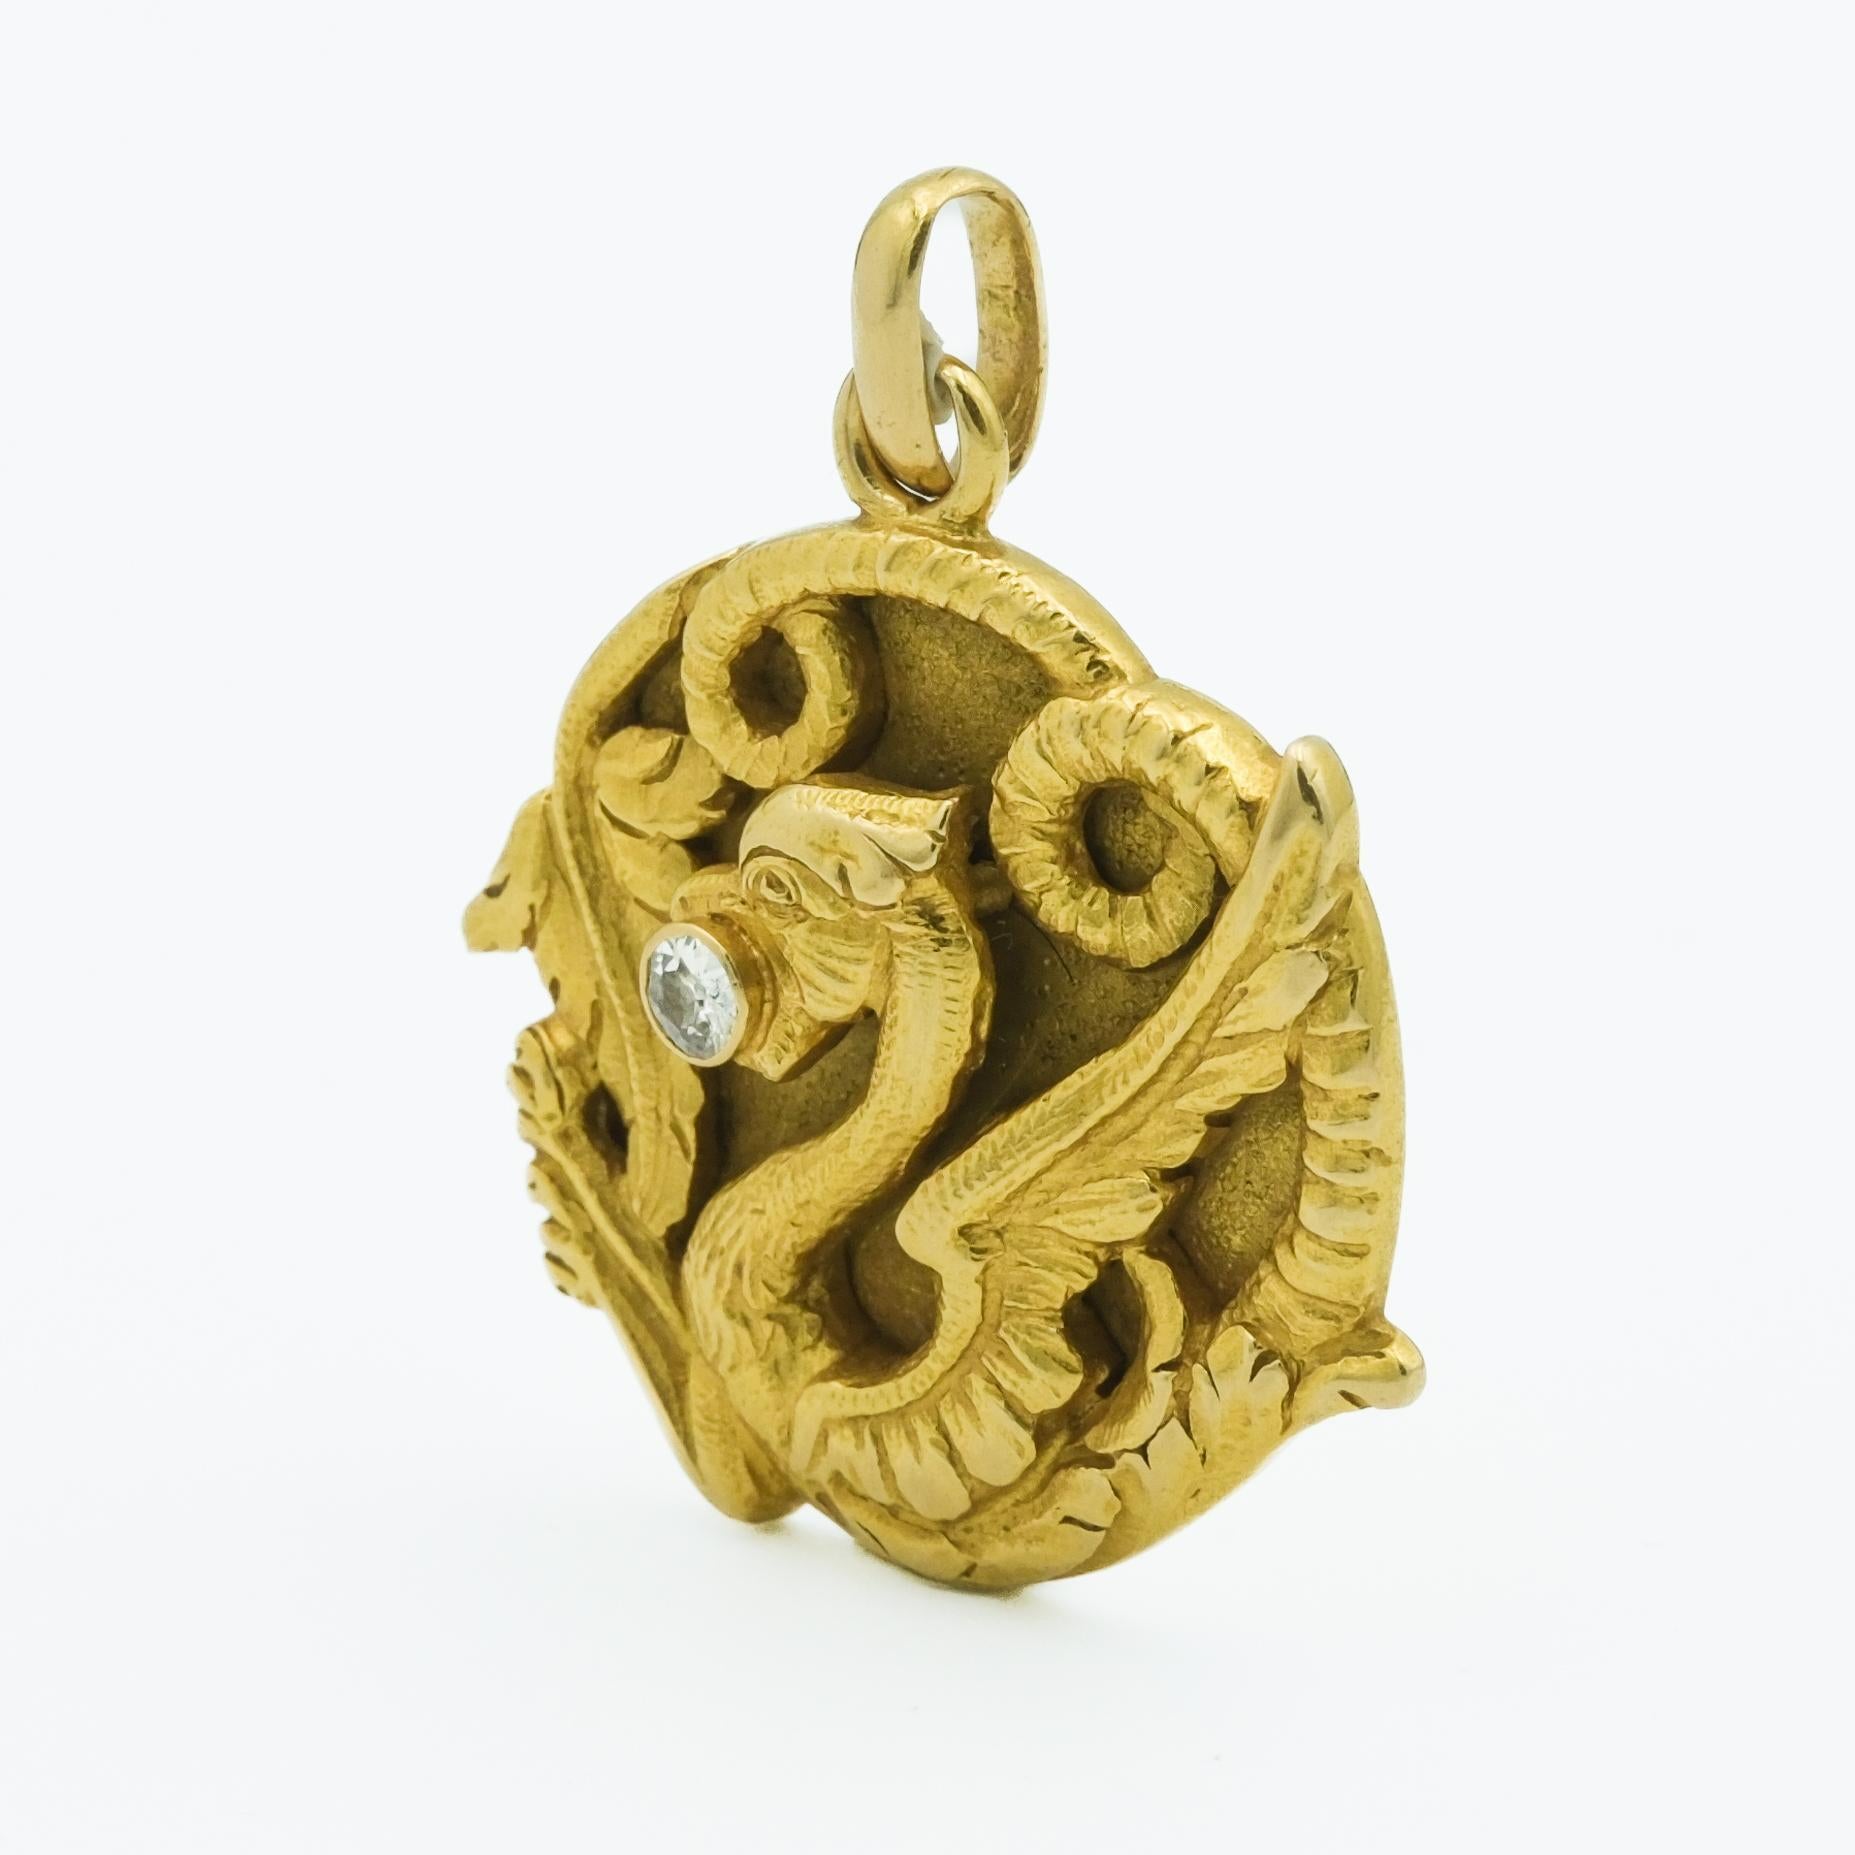 This 18 karat yellow gold dragon pendant is a masterpiece of the Art Nouveau period, renowned for its intricate design and enchanting historical significance. The pendant exhibits a stylized dragon, masterfully crafted to capture the mystical allure